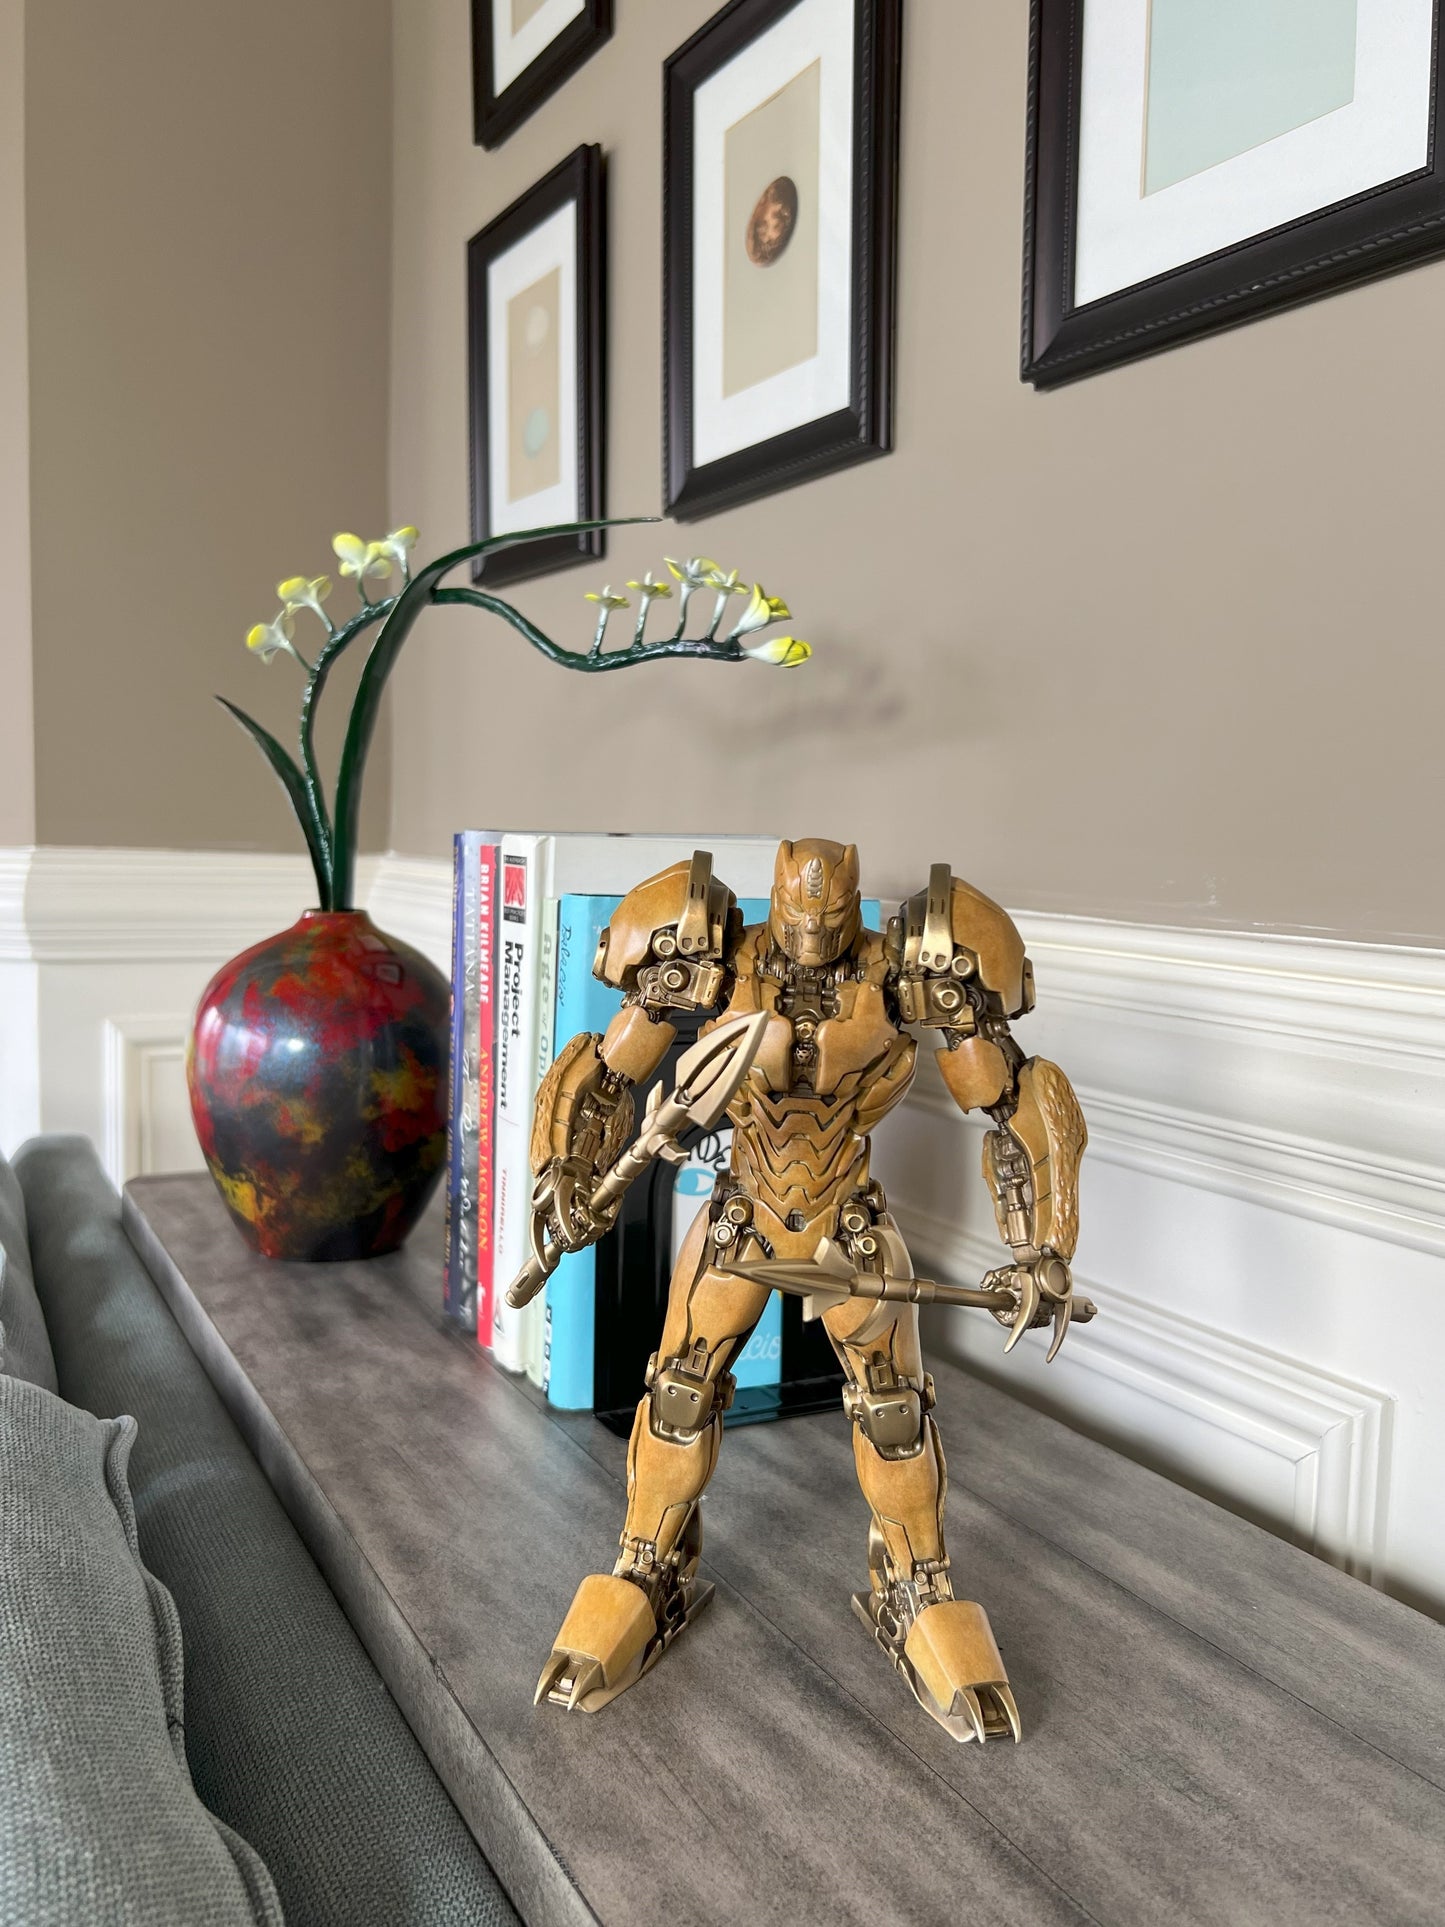 Transformers statues Sculpture: Cheetor Warrior Classic Collectible, High end Toy, Home Decor, Colored brass Sculpture